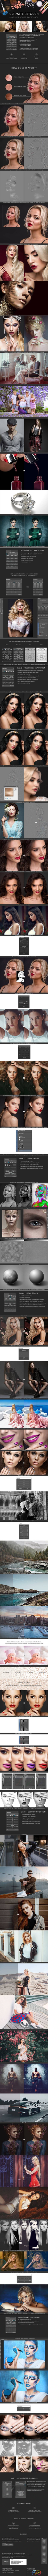 Ultimate Retouch Panel 3.8 1